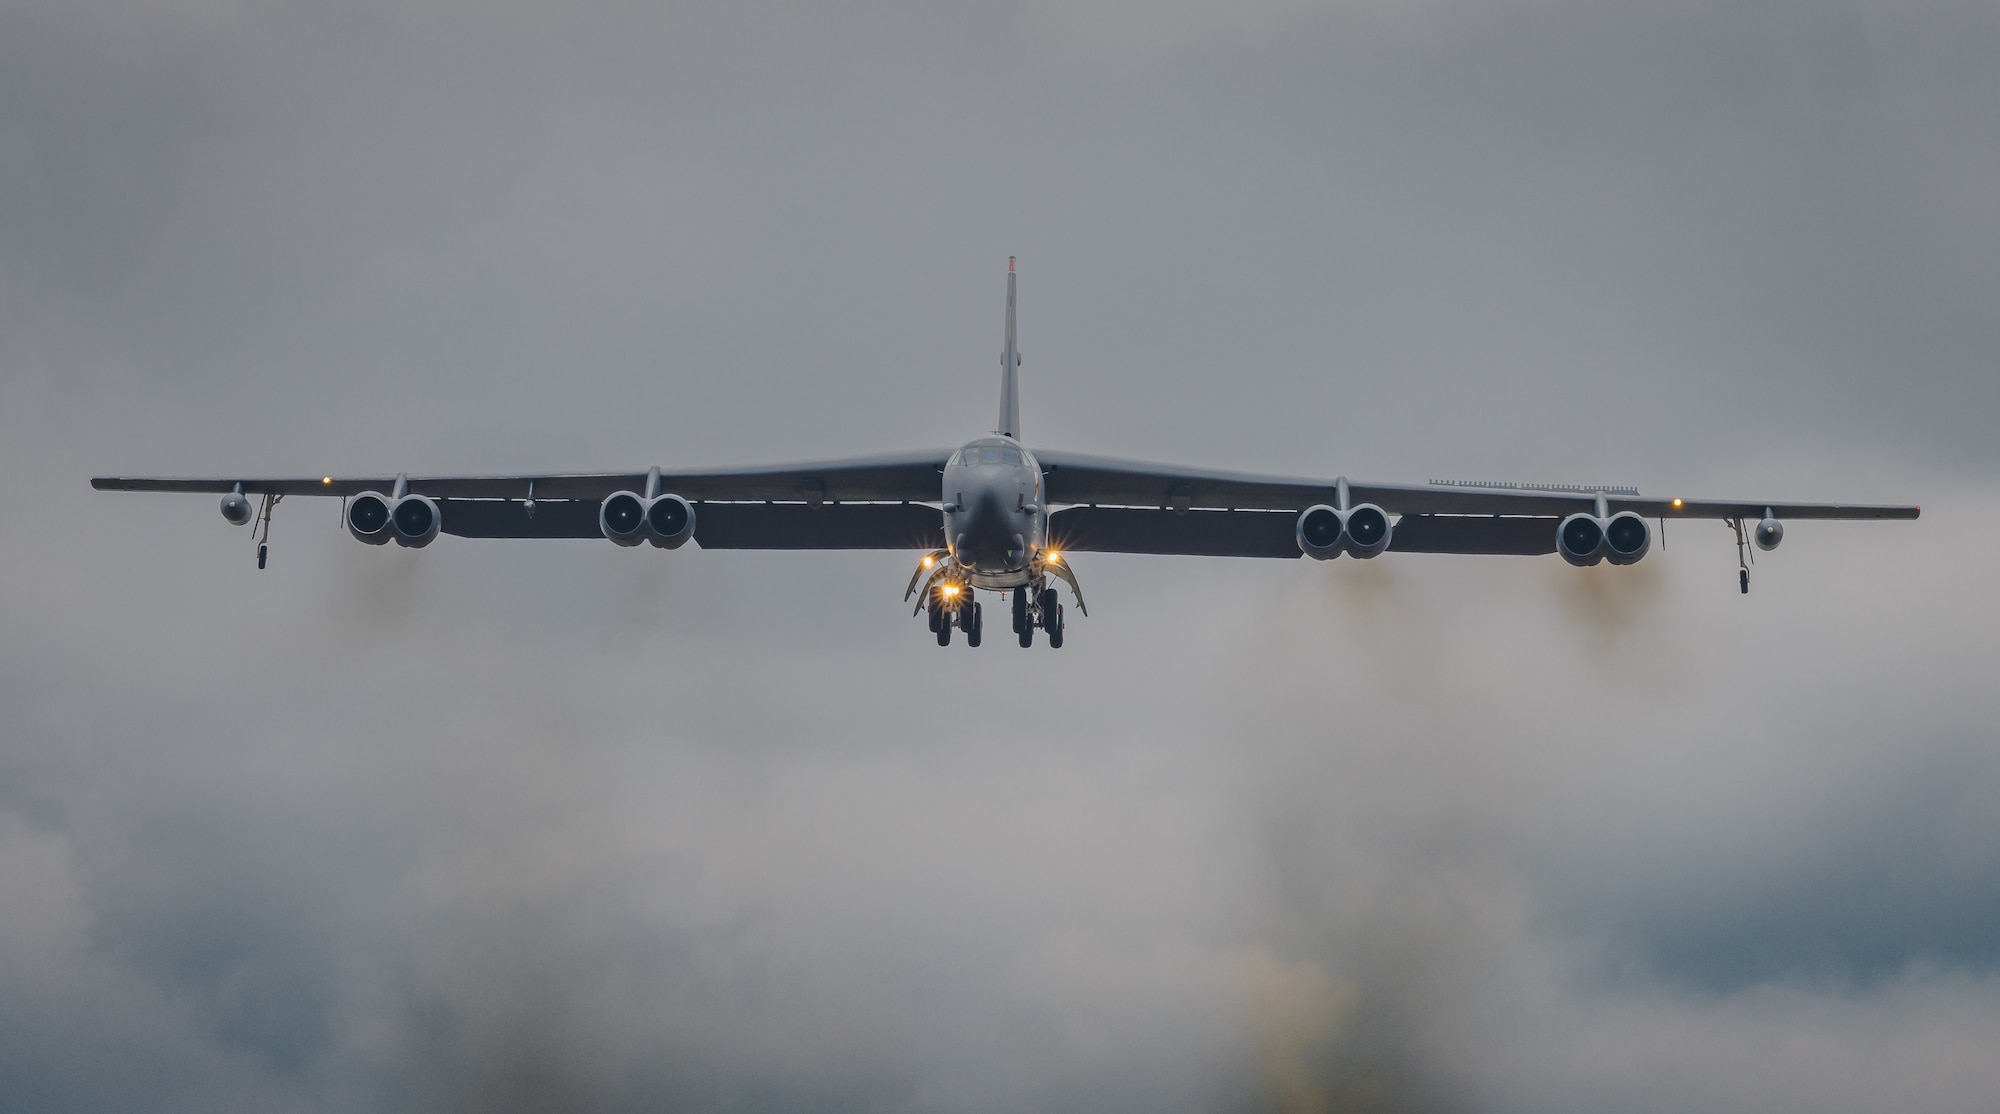 U.S Air Force B-52s Arrive in Europe Strengthening Links with NATO Allies and Partners